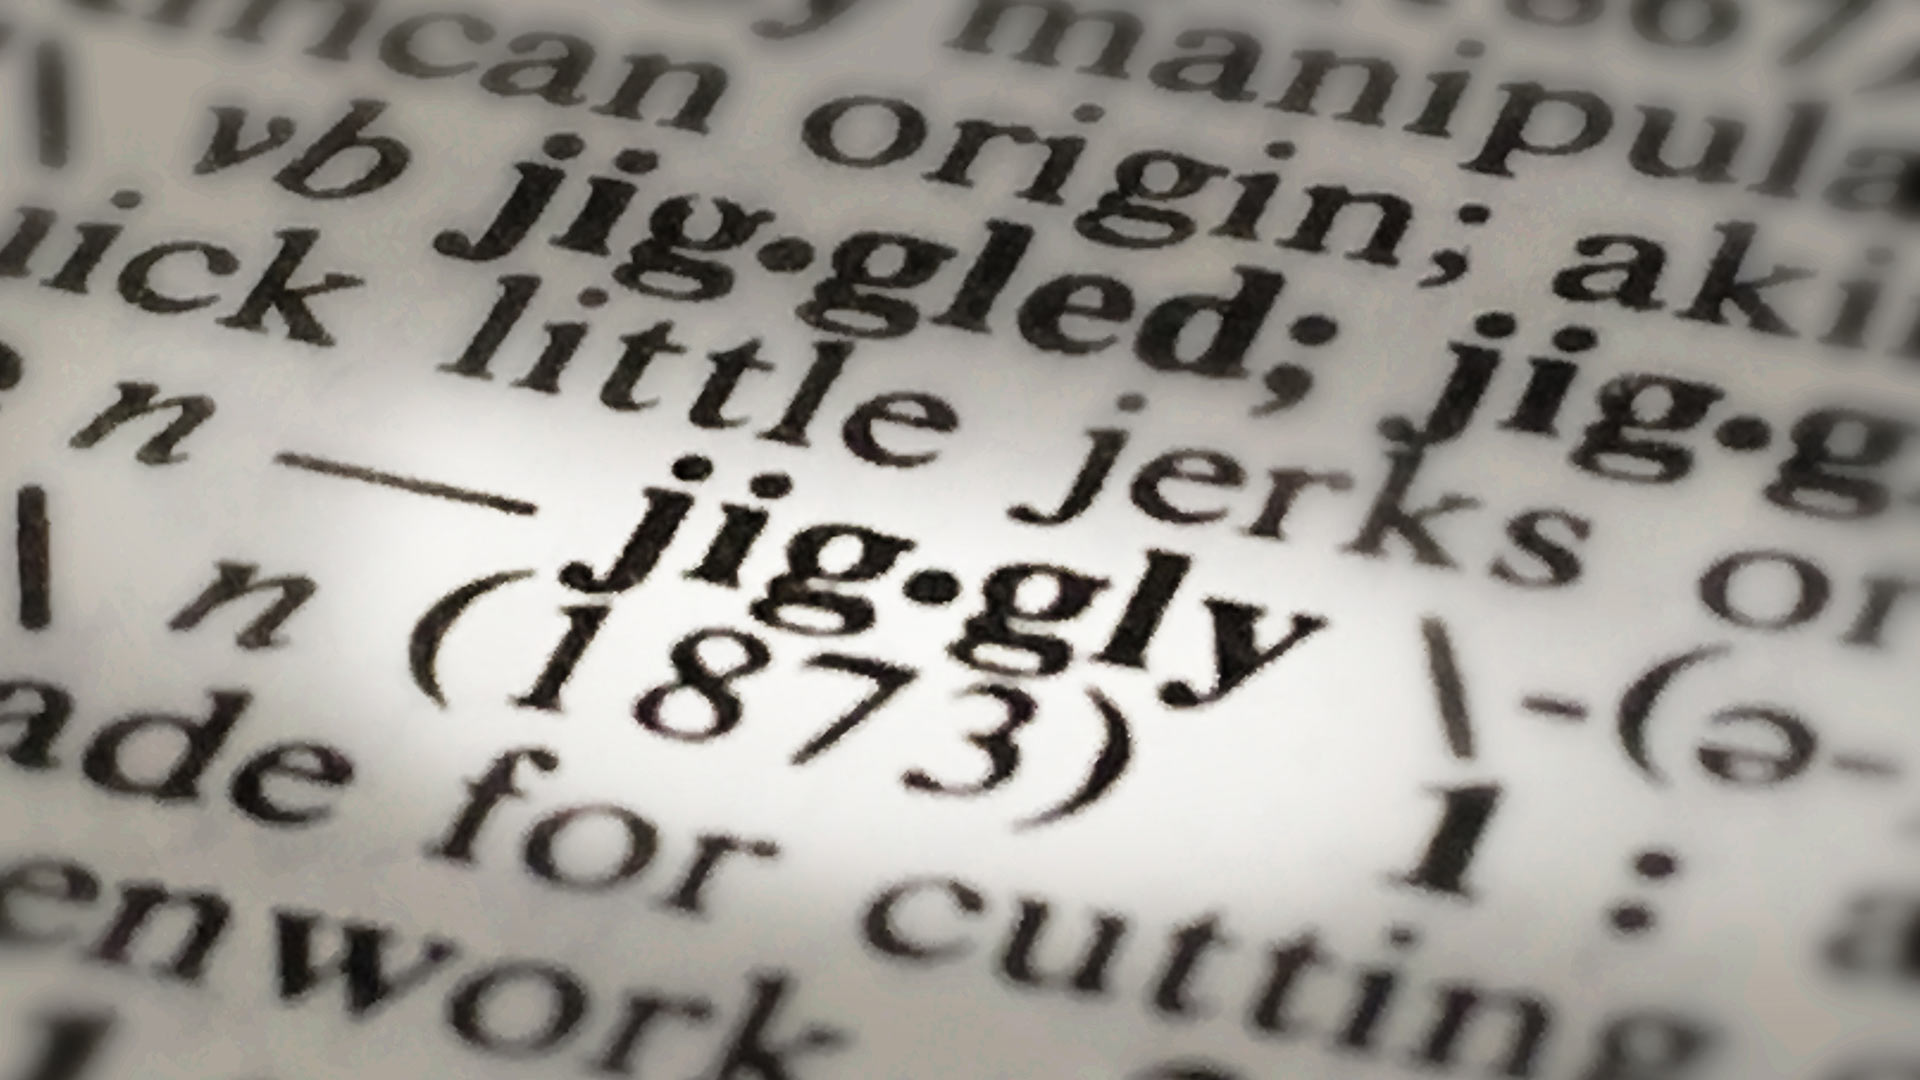 Upchuck, bubby, wriggly, yaps, giggle, guffaw, puffball and jiggly rank among the funniest English words, according to a new report.